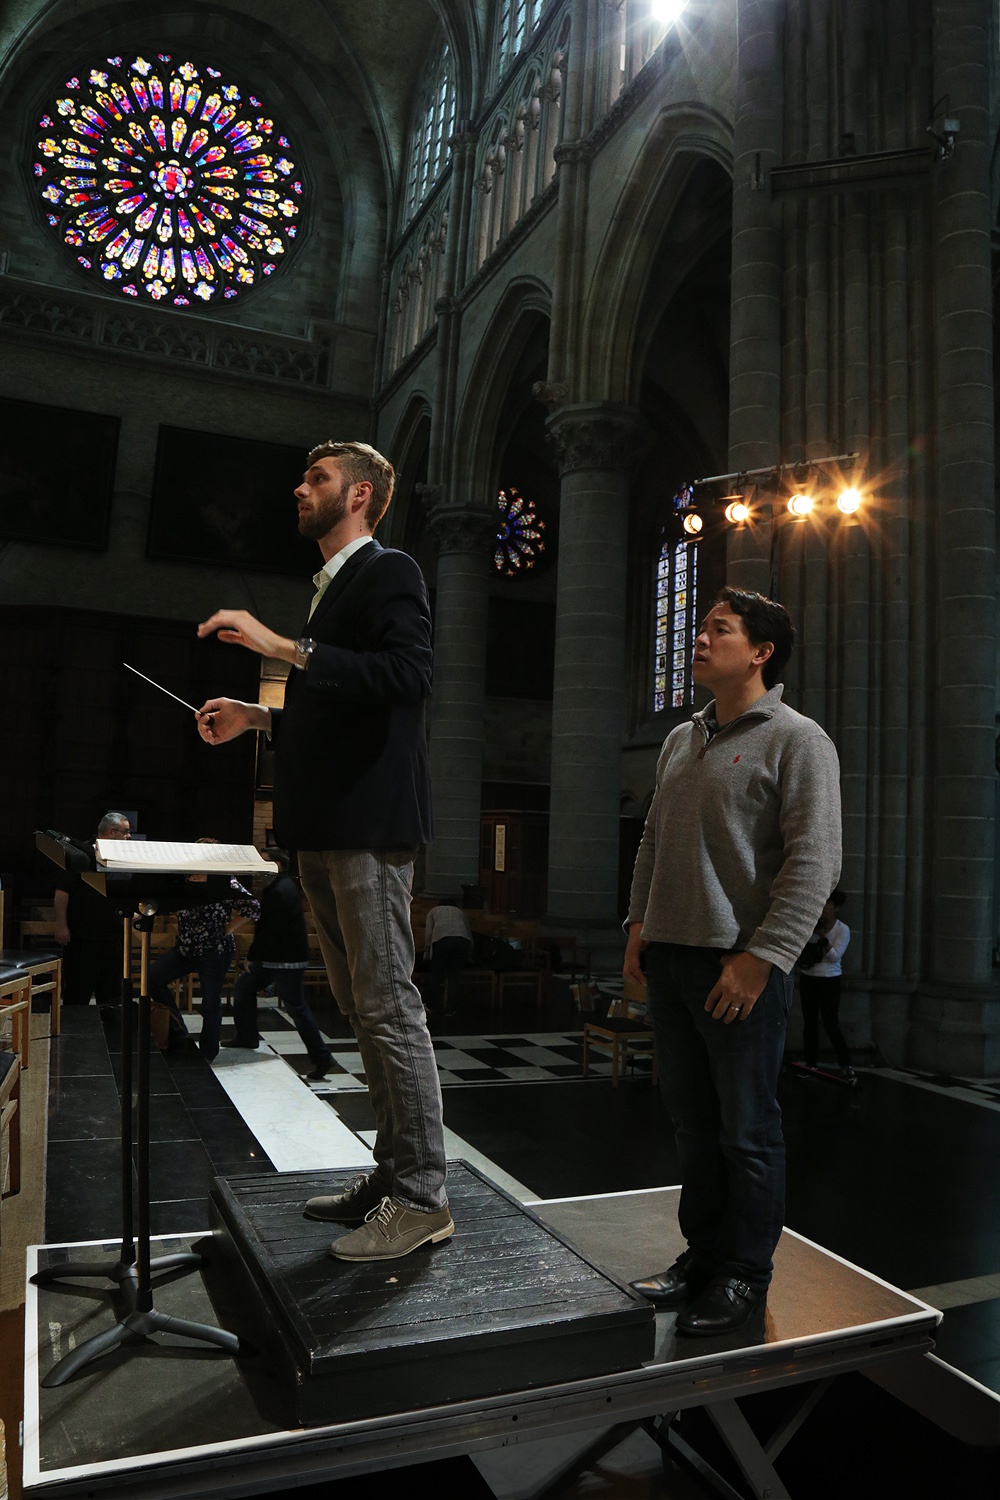 bill-hocker-eric-cooate-ming-luke-conductors-st-martin's-cathedral-ypres-belgium-2016